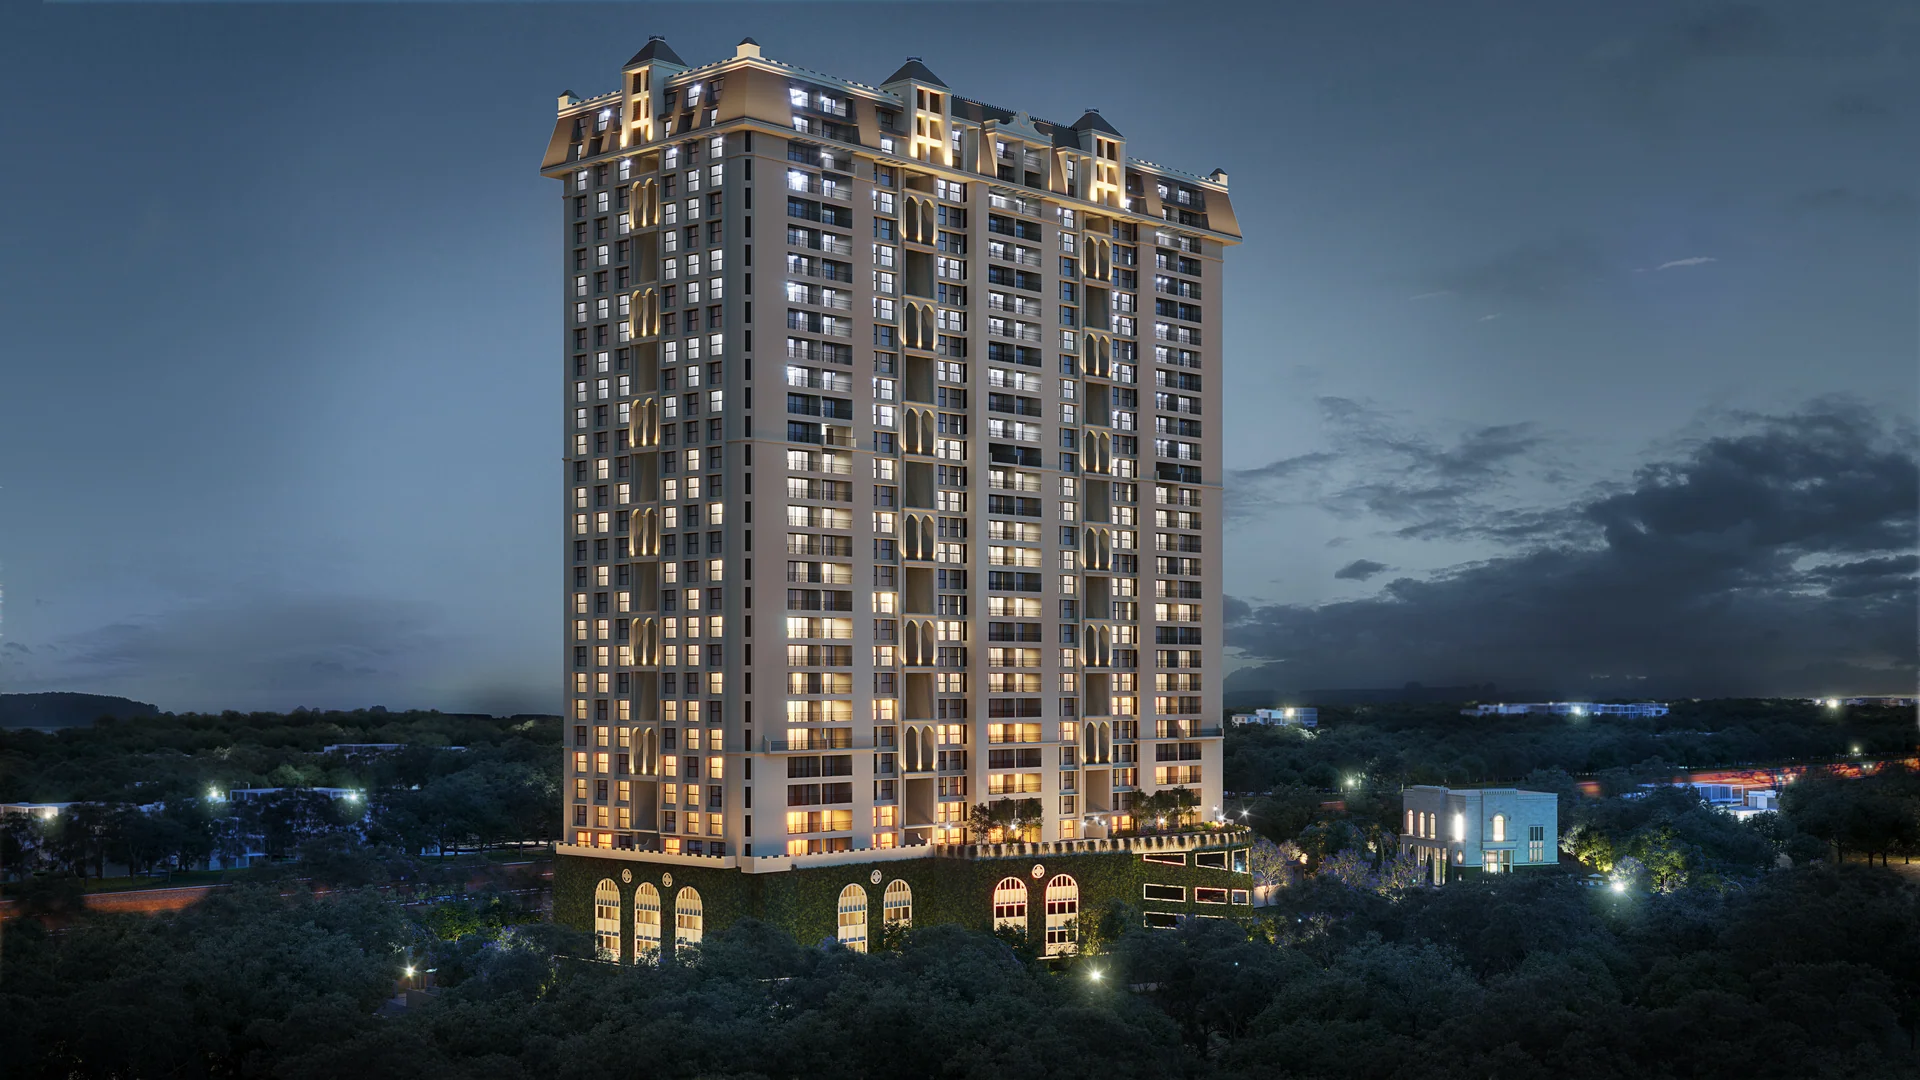 Godrej Sector 49 Gurgaon: Luxurious Living at its Finest